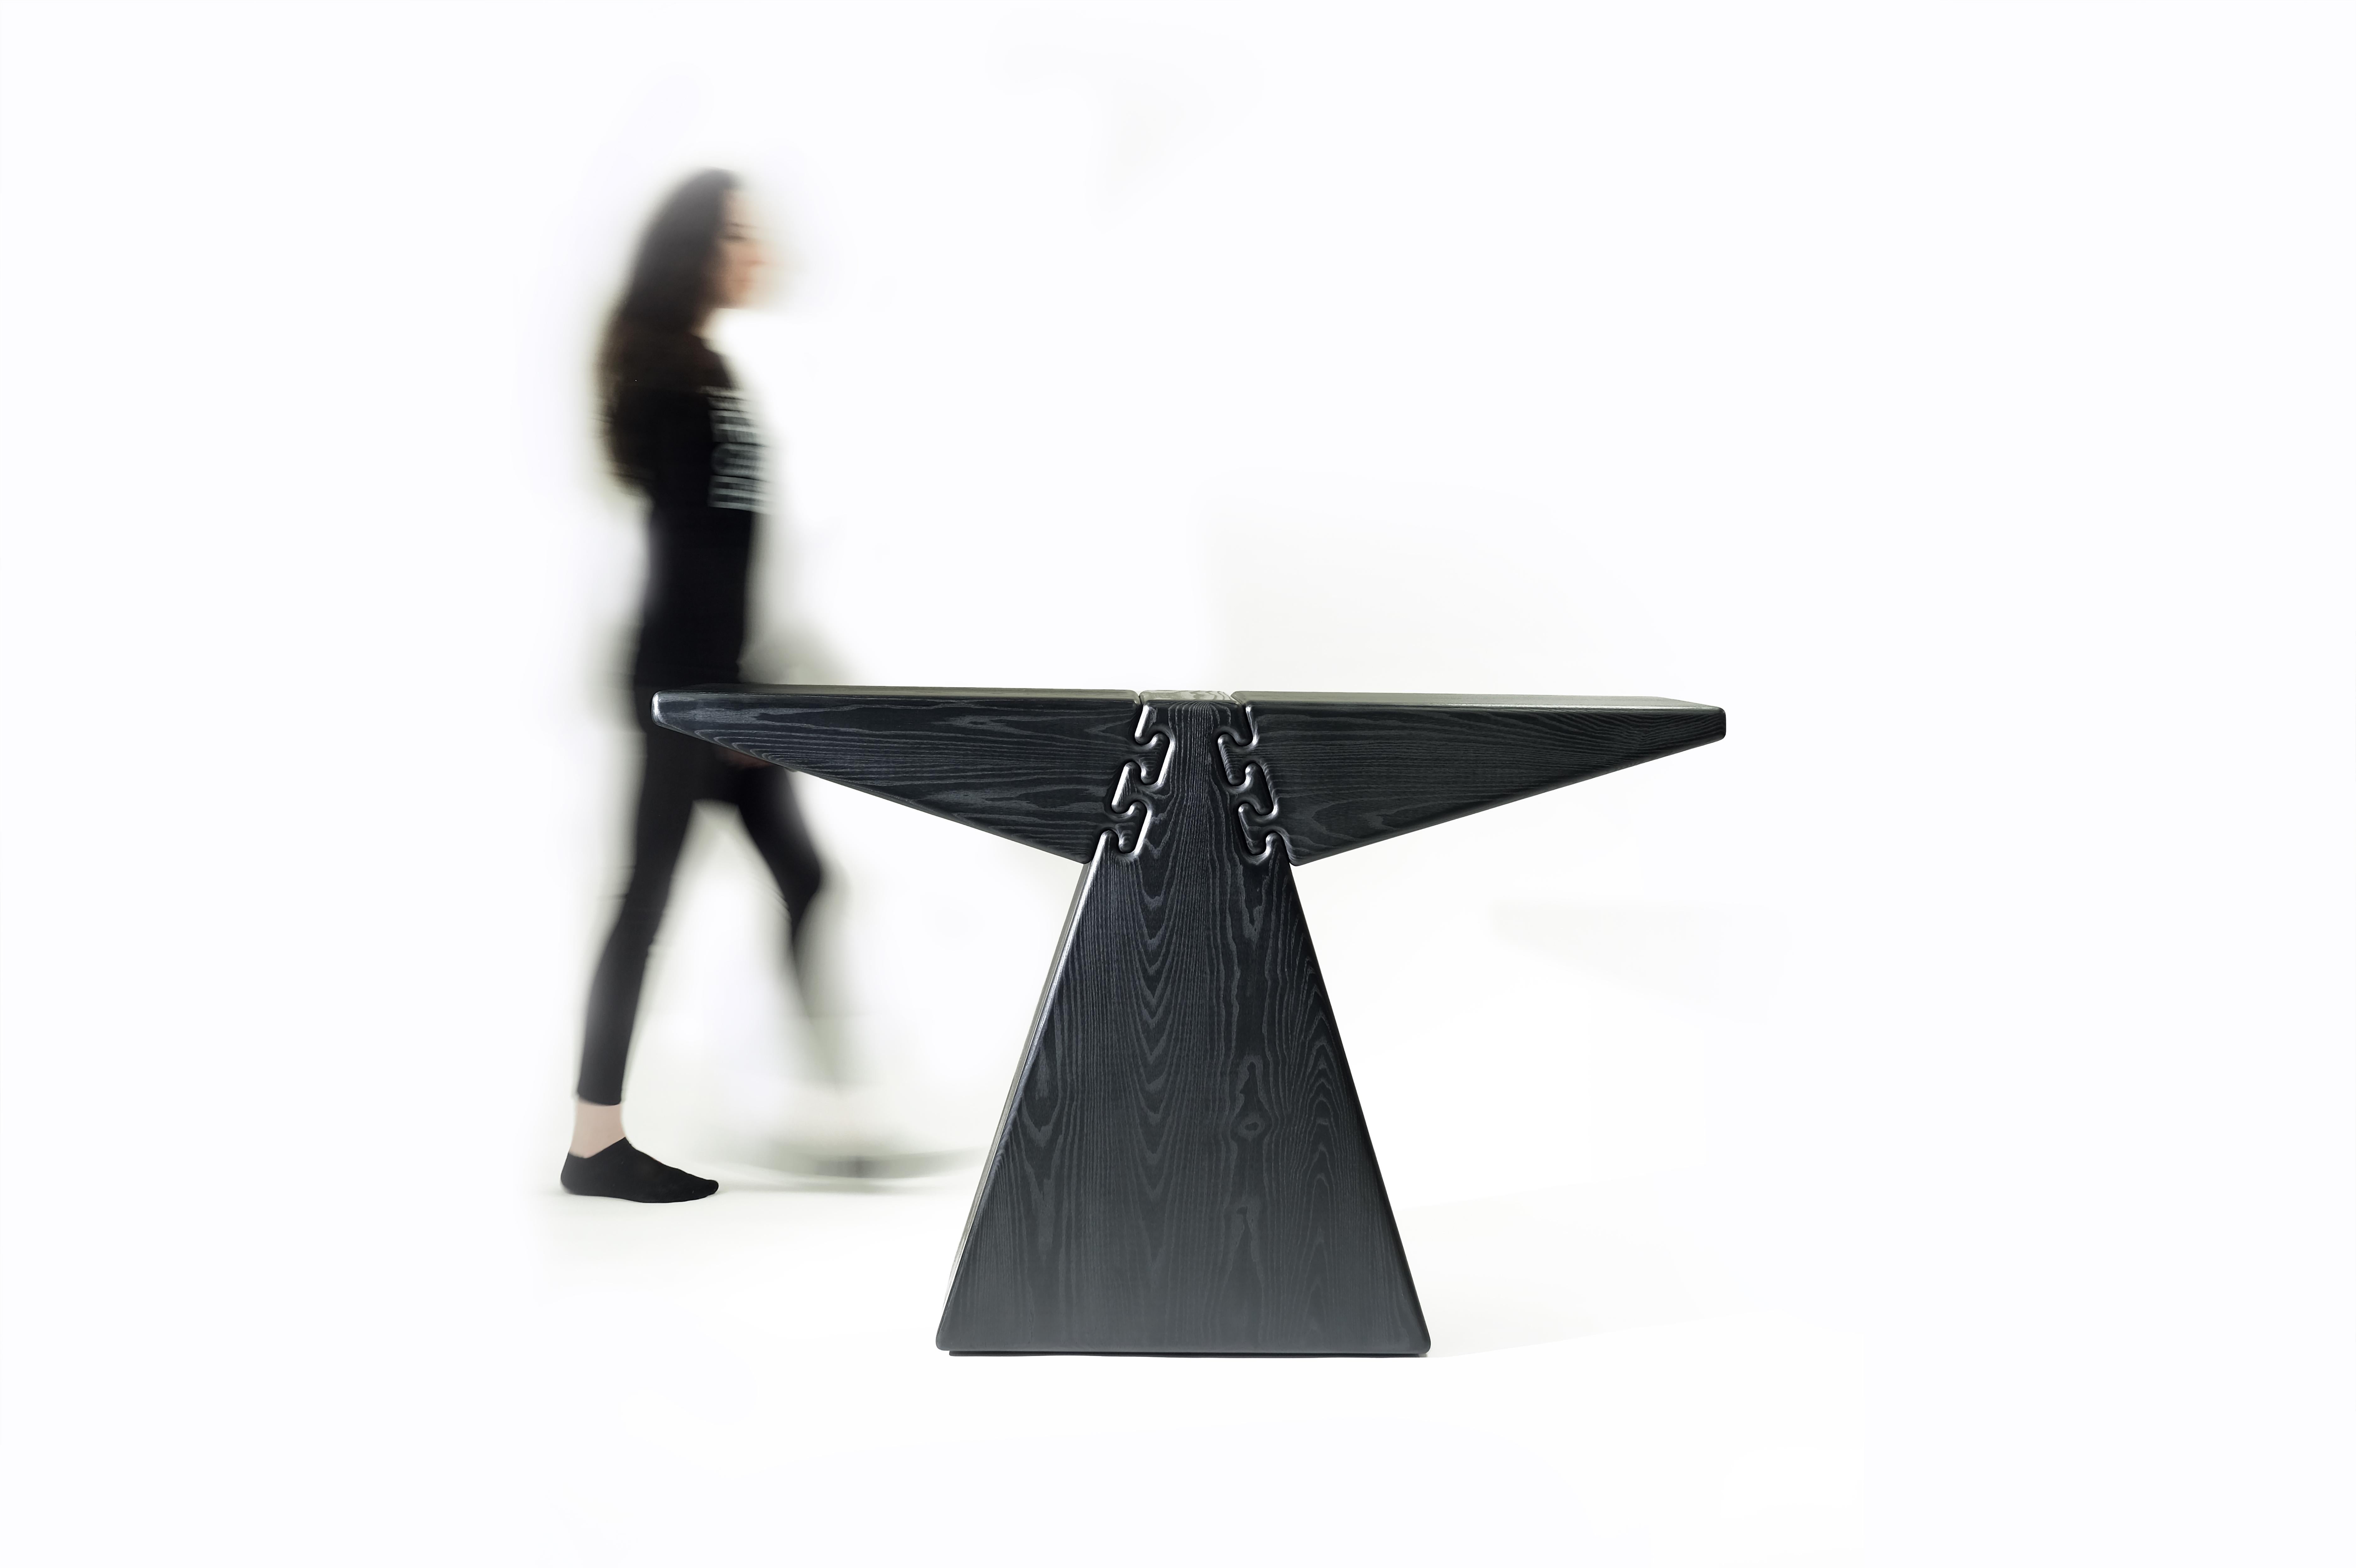 Anvil is composed of geometric shapes, extruded from abstract planes into solid forms. The joinery is simple and transparent. Rounded edges soften sharp angles, enhancing the whimsical spirit of the piece.

Anvil is part of Erika's first furniture